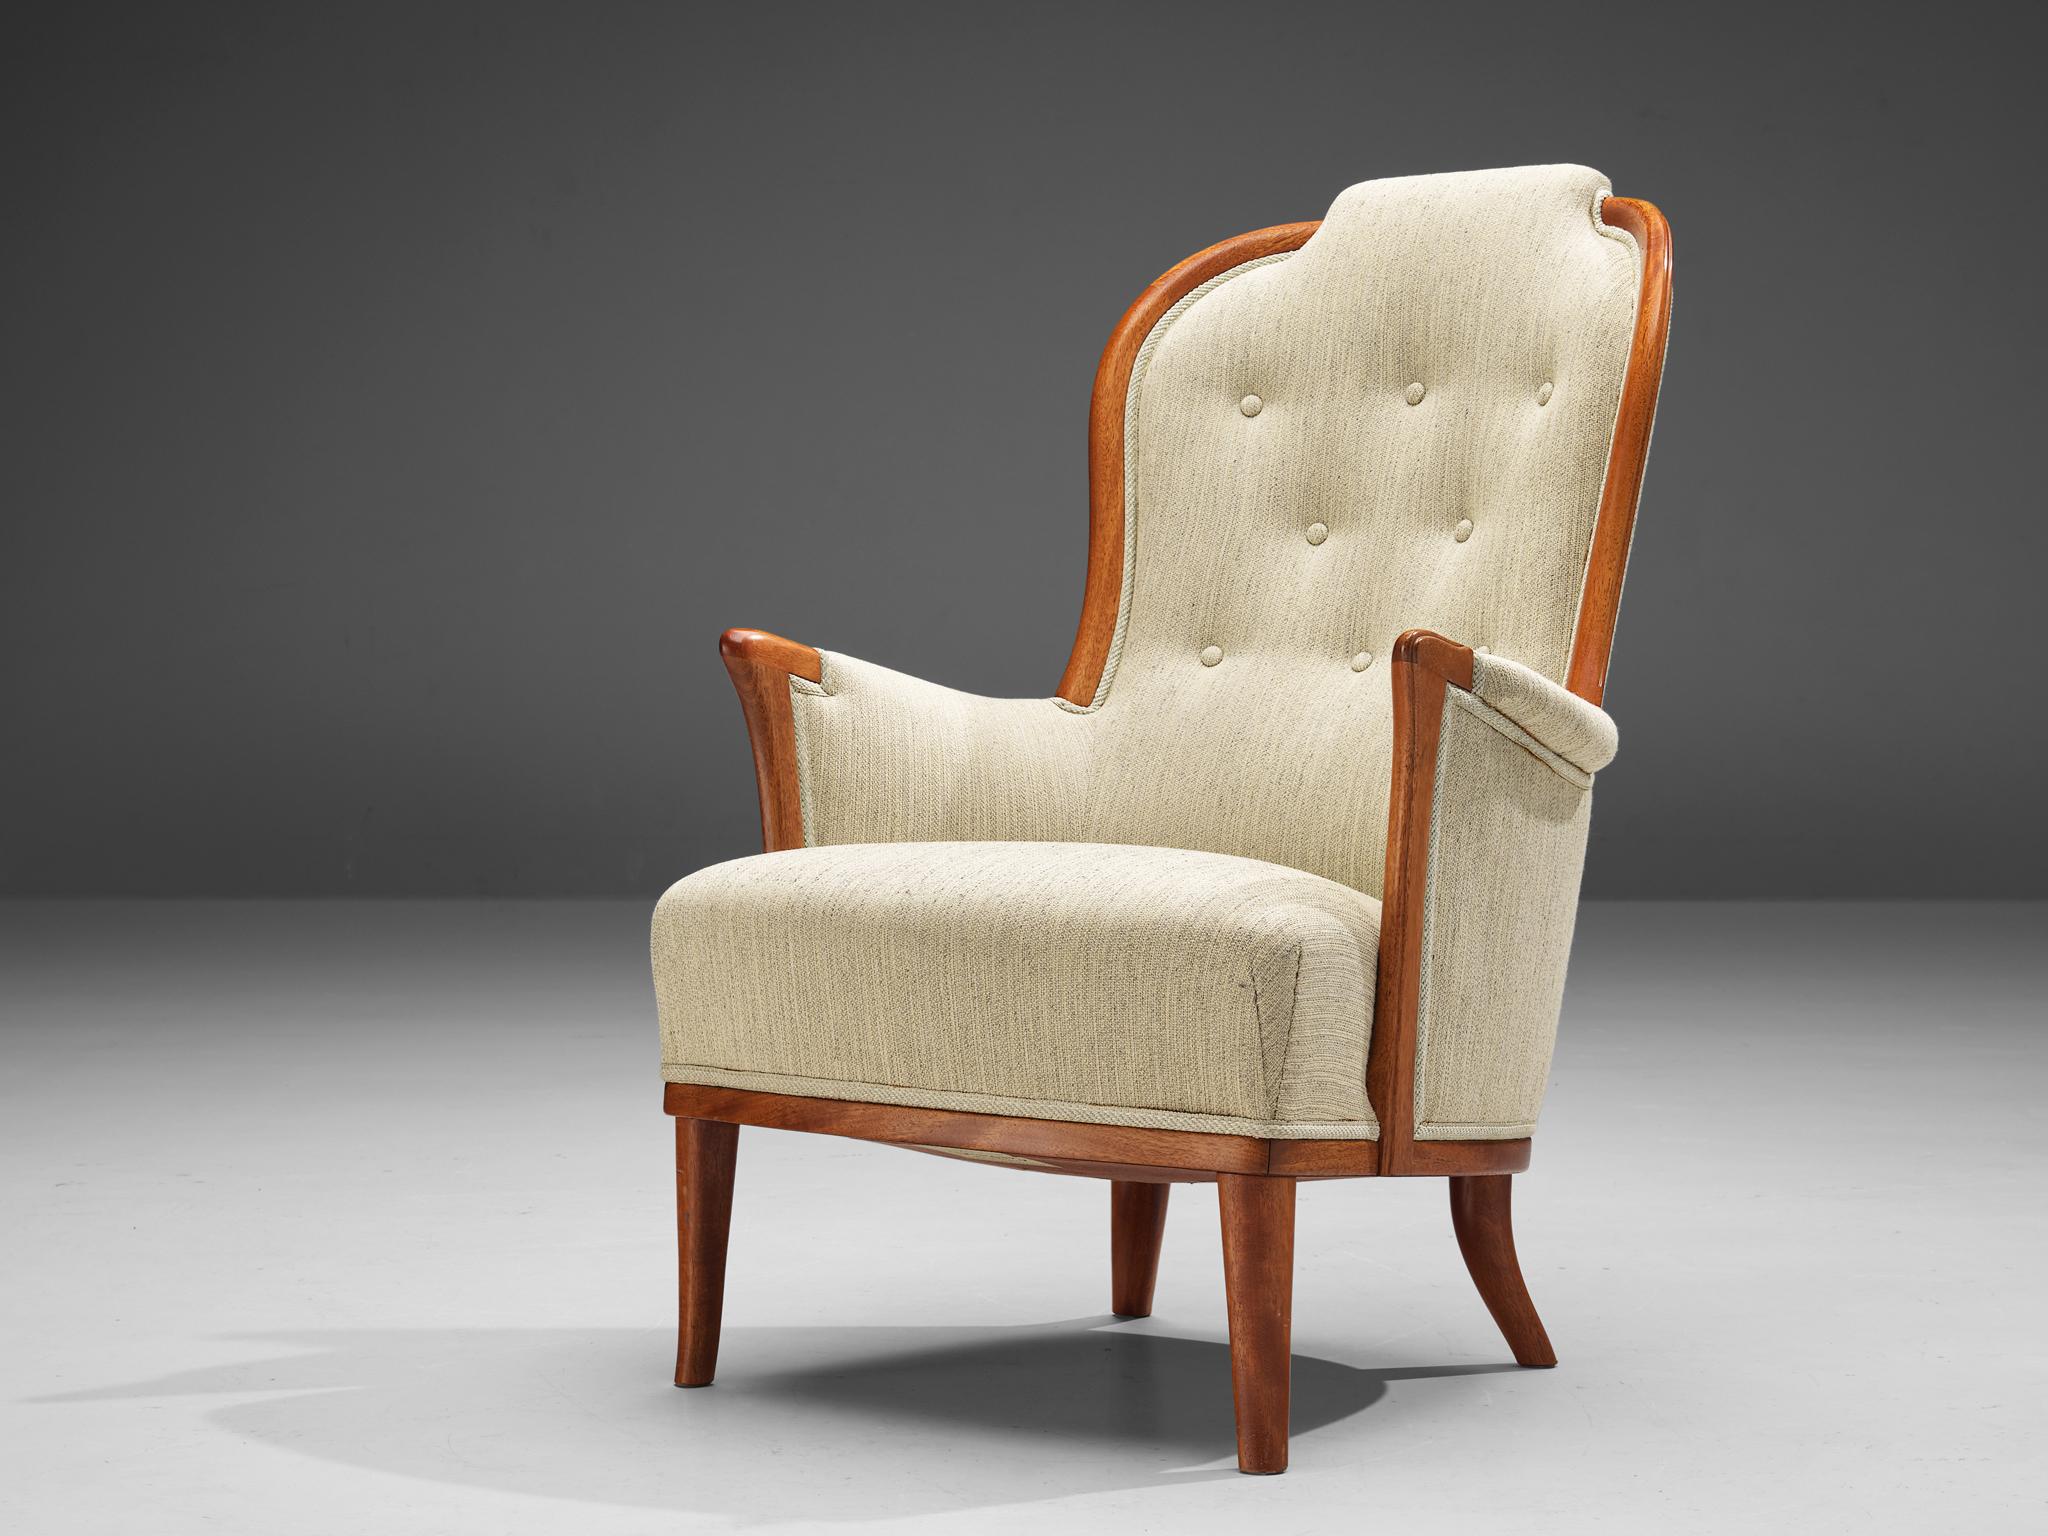 Carl Malmsten for O.H. Sjögren, 'Our Lady' easy chair, teak, fabric, Sweden, 1950s. 

Very interesting Swedish lounge chair by Carl Malmsten in off-white fabric with tufted back. The distinctive lines and graceful curves of its design create a